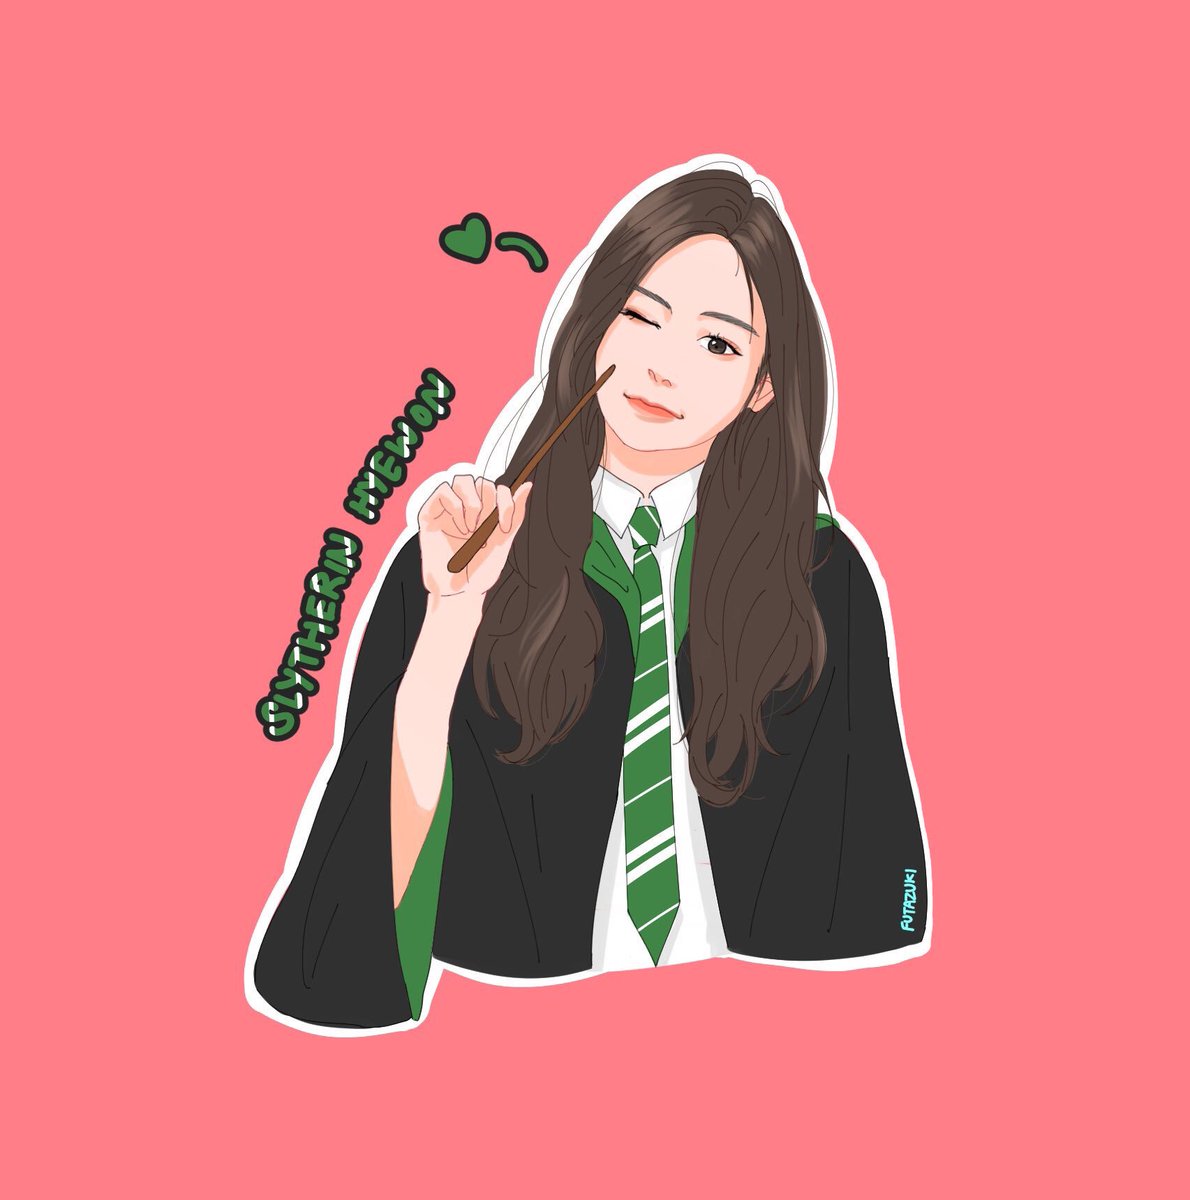 Hyewon: SlytherinTakes Transfiguration classes in hopes that one day she can transform everything into edible food. Also takes Arithmancy classes. Is interested in Muggle Animation. #KangHyewon  #강혜원  #カンヘウォン